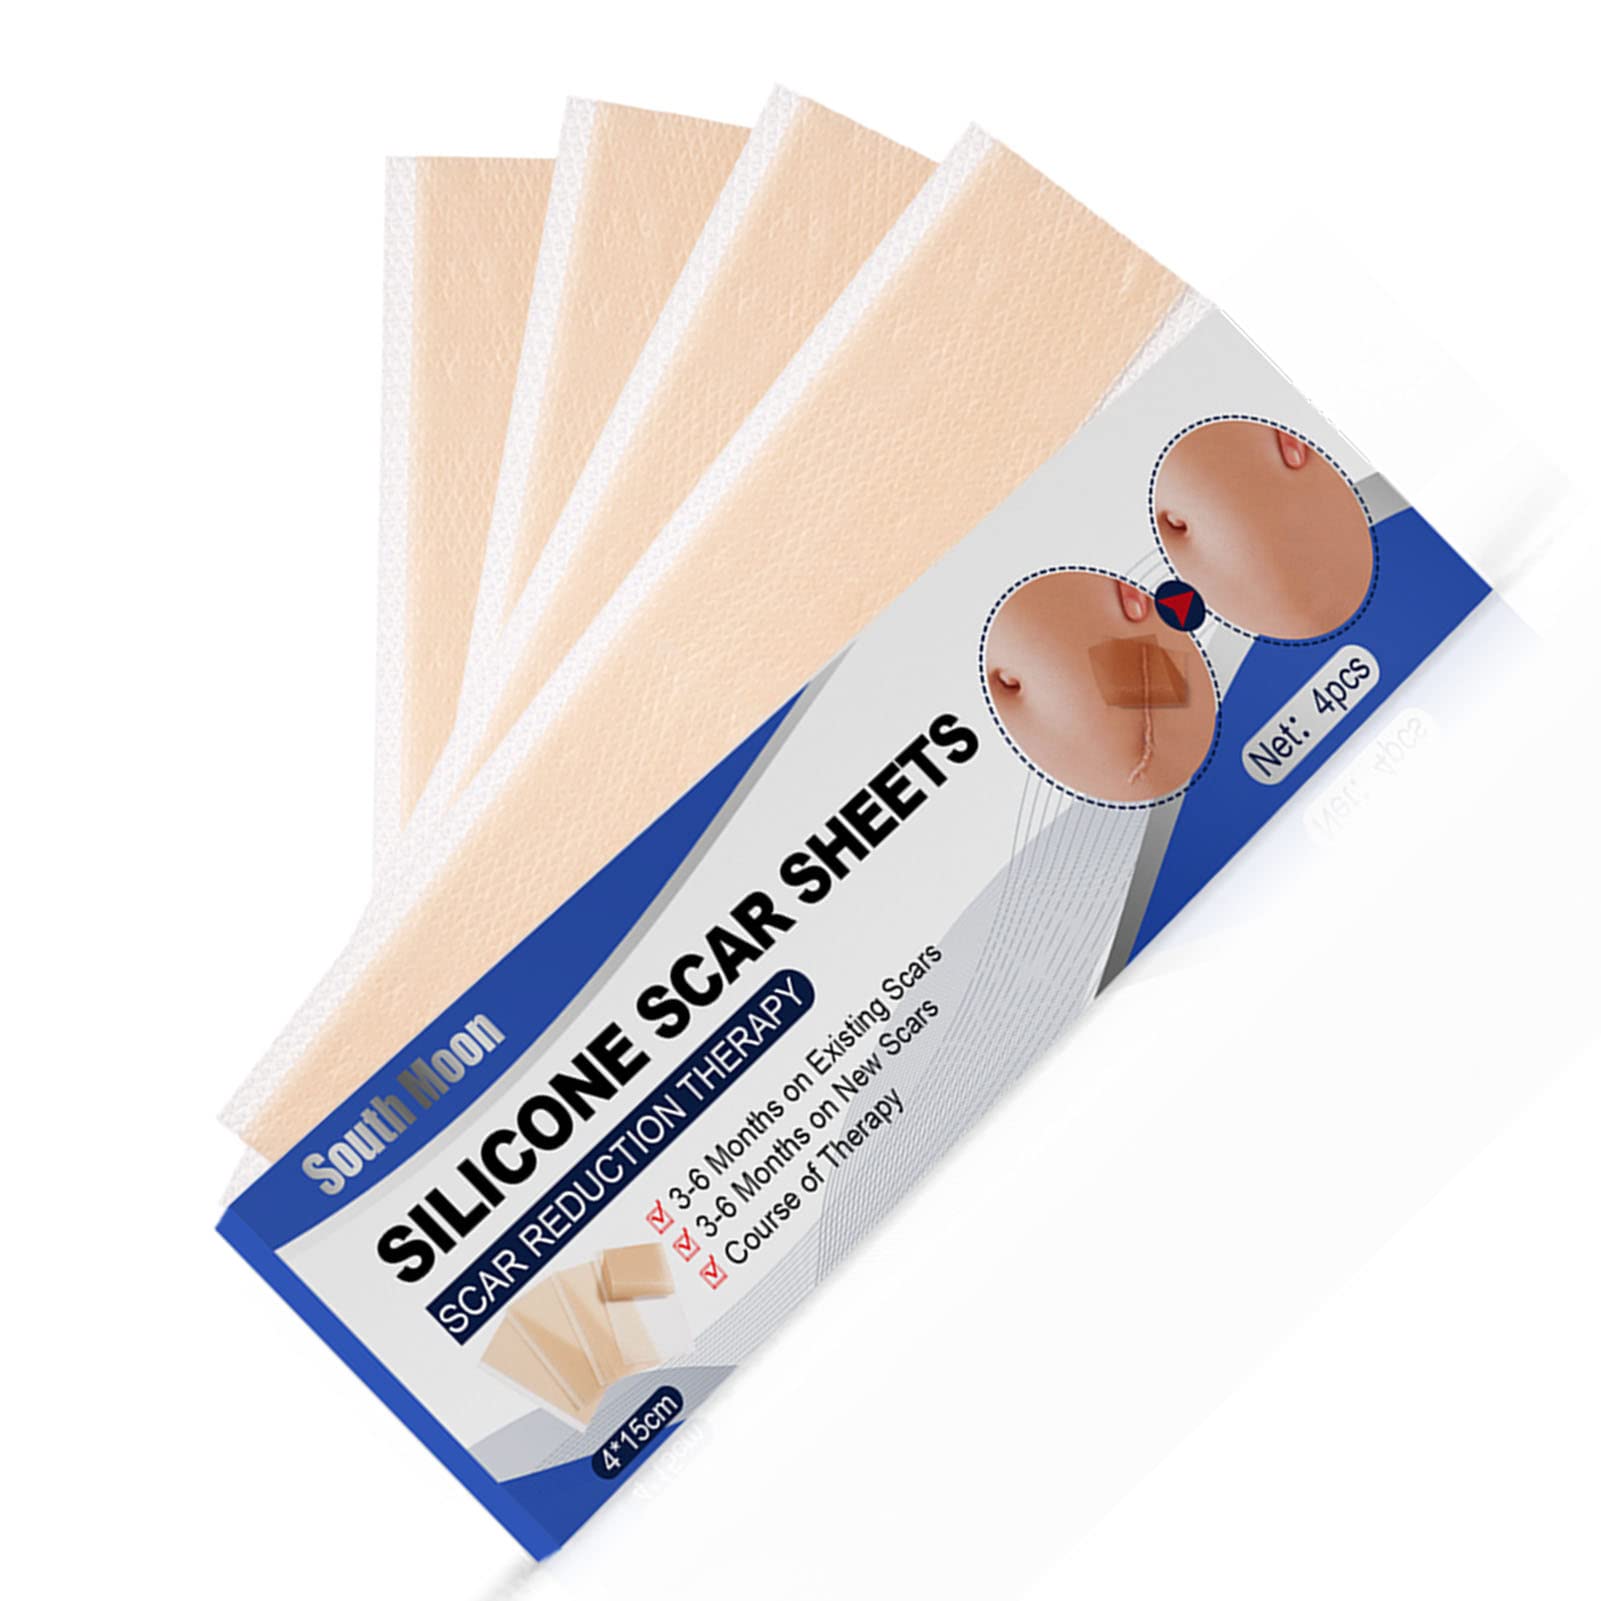 Walgreens Large Silicone Scar Sheets Odorless, Transparent, Transparent